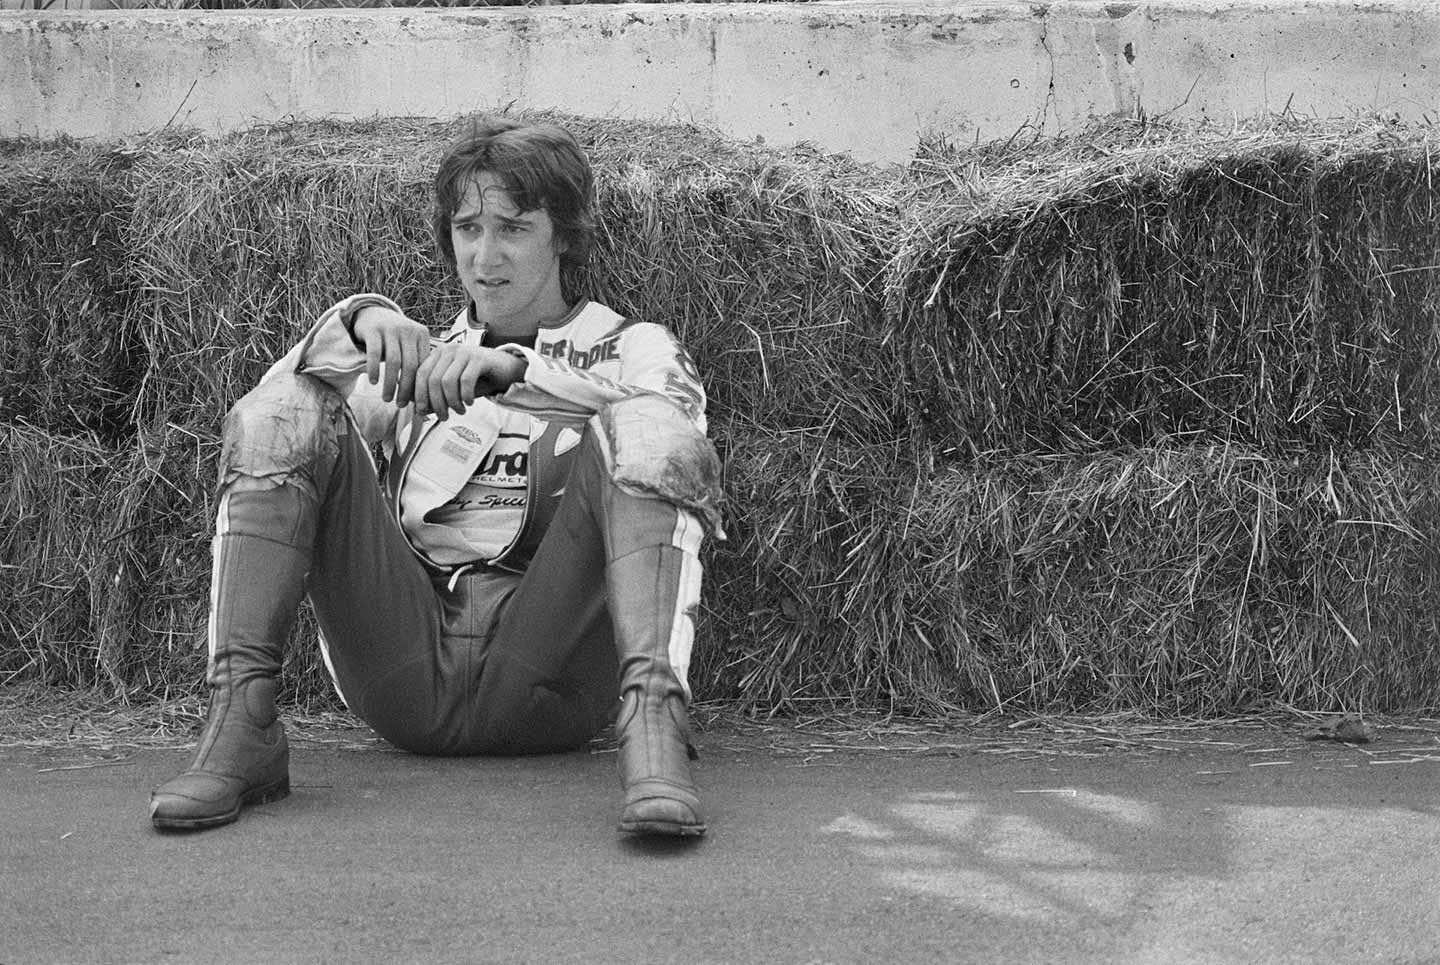 The greatest racers have tremendous memories and capacity for thought—and perhaps worry more than the rest of us as part of their drive to succeed. Here, Freddie Spencer leans against hay bales lining a concrete wall at Loudon in 1979.